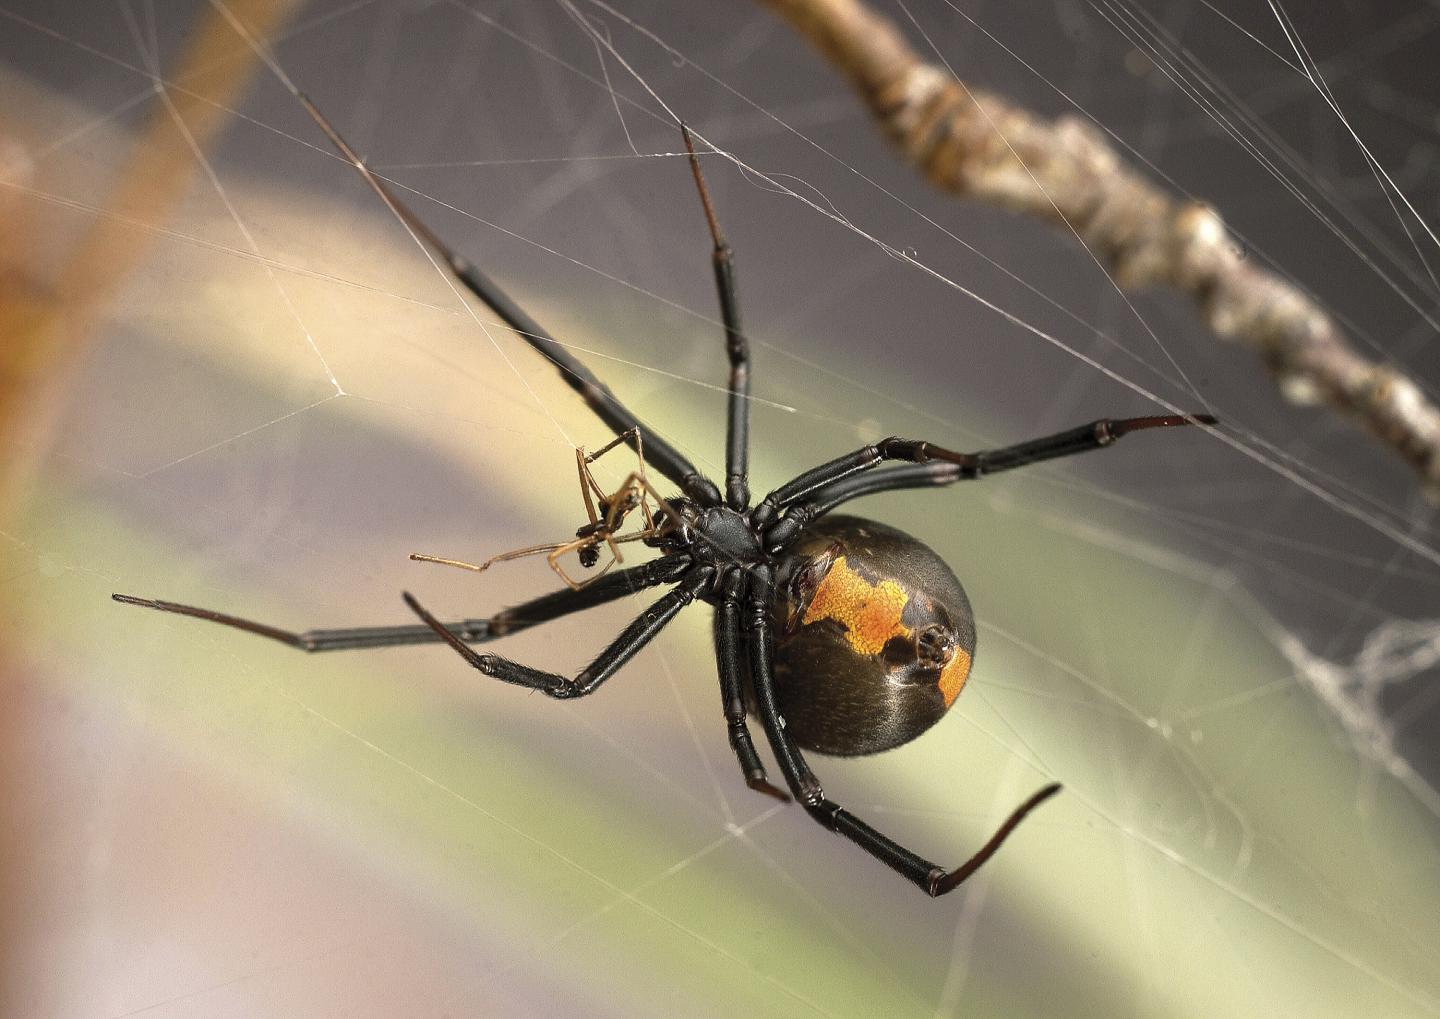 This Seemingly Horrific Mating Strategy Appears to Benefit Both Male and Female Redback Spiders